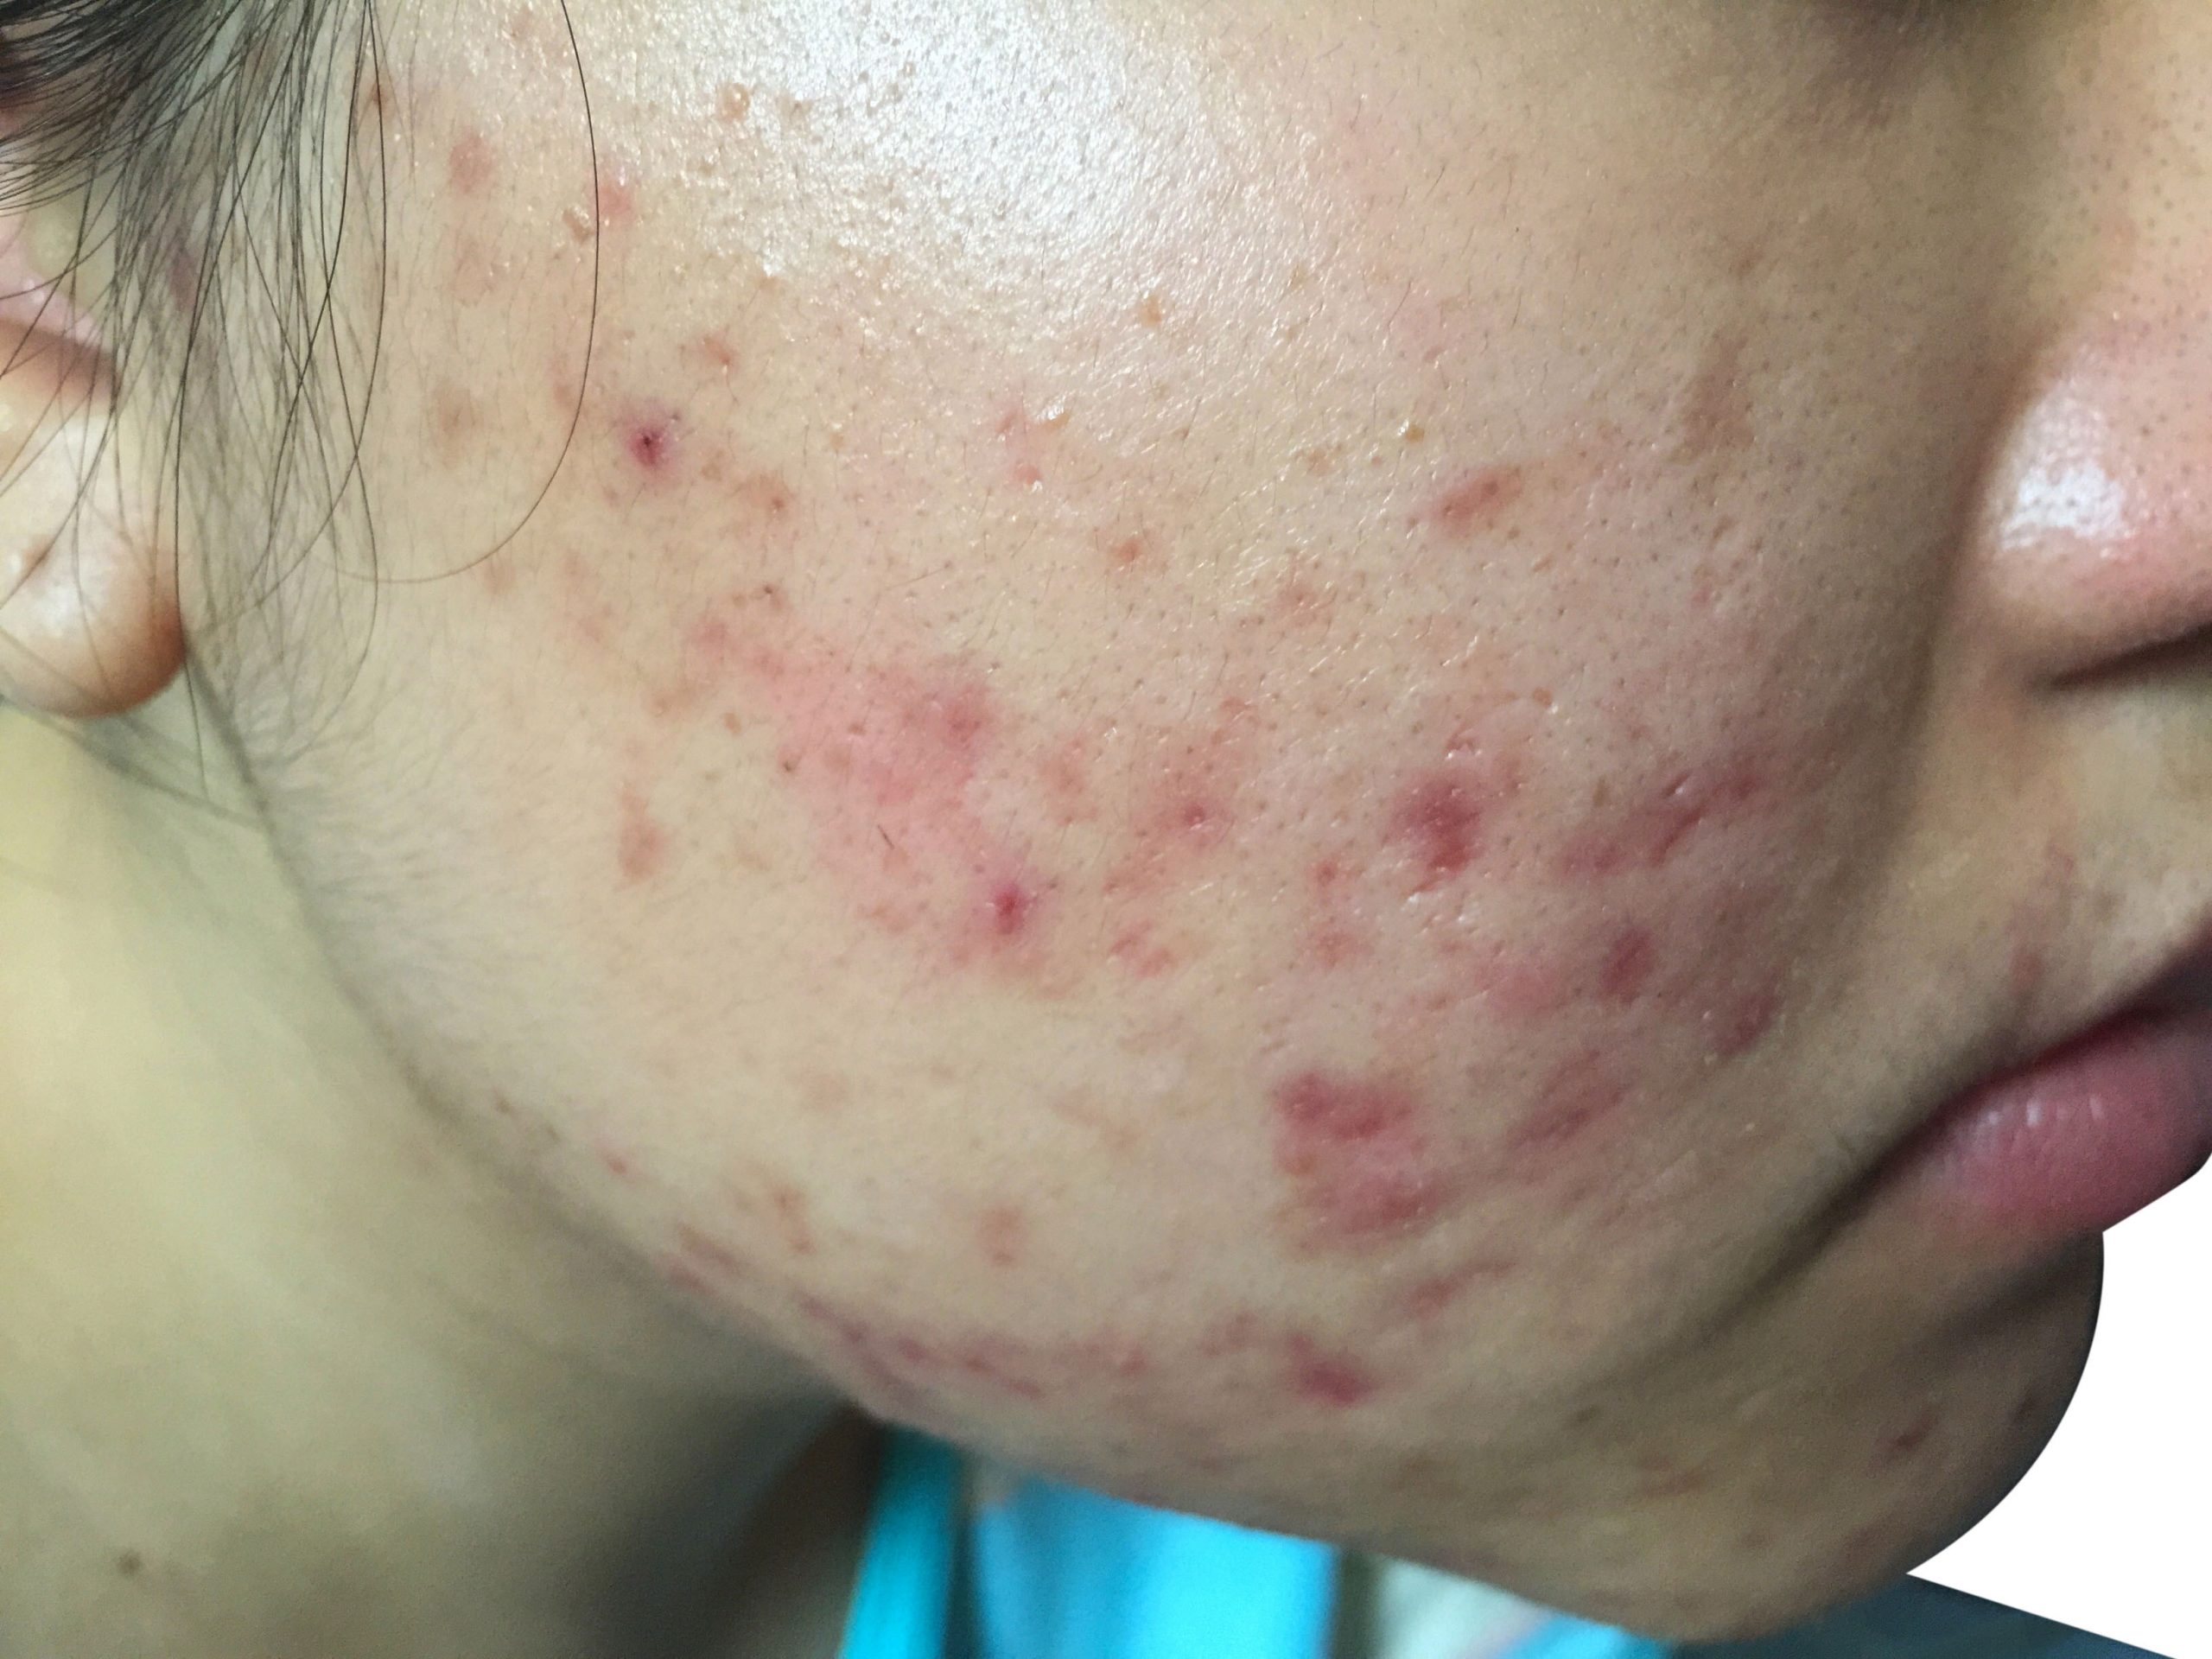 Using Viral Proteins against Bacteria That Cause Acne